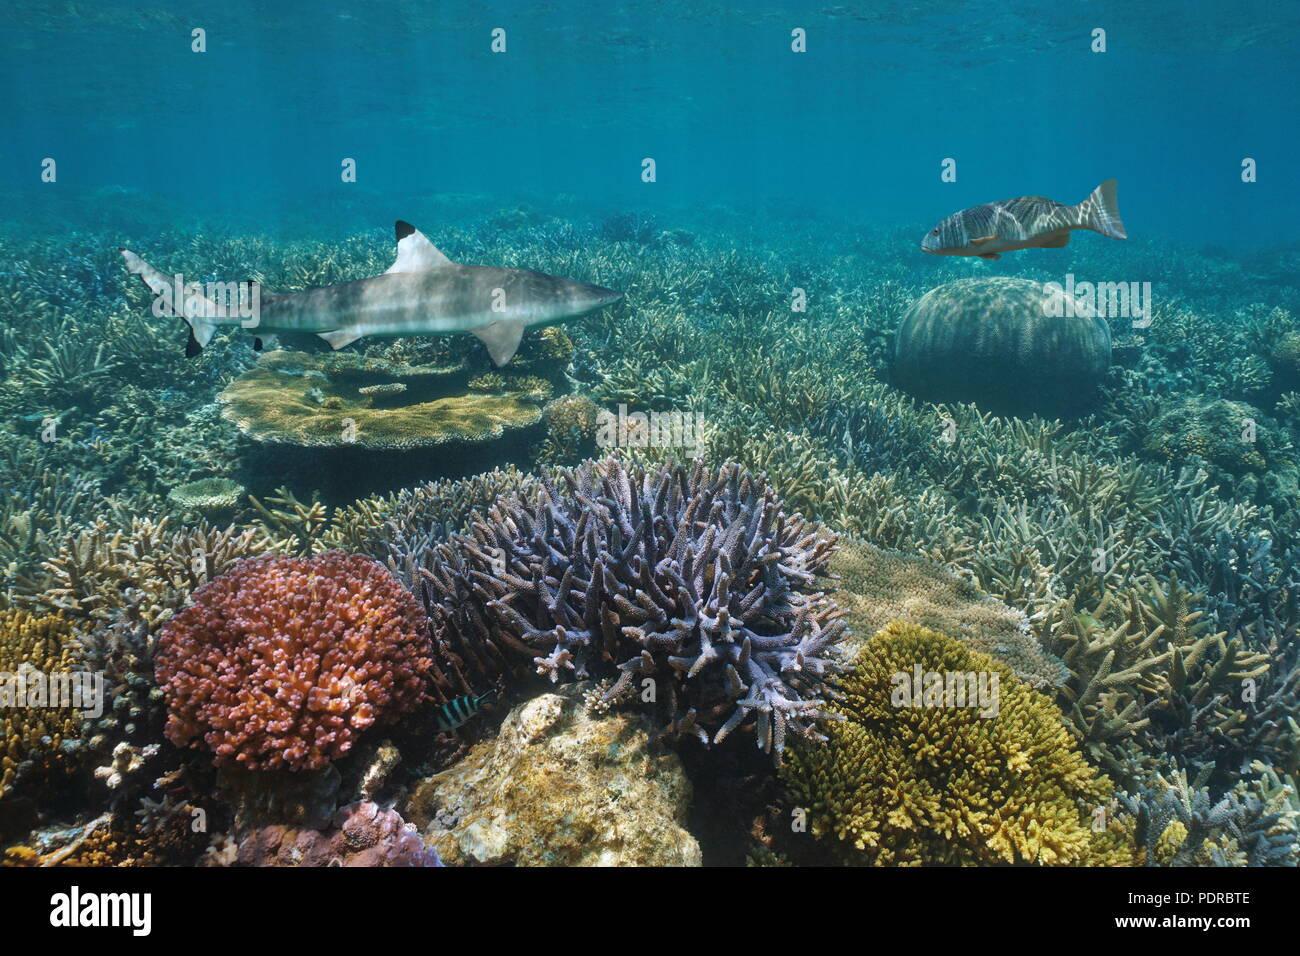 Colorful coral reef underwater with a blacktip reef shark and a coral trout grouper, Pacific ocean, New Caledonia, Oceania Stock Photo